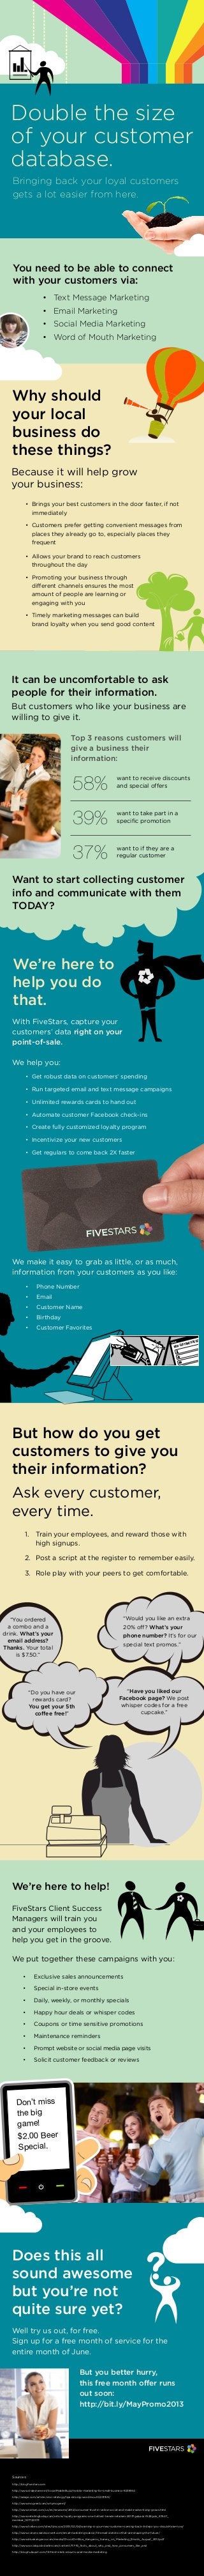 Because it will help grow
your business:
With FiveStars, capture your
customers’ data right on your
point-of-sale.
We help you:
We make it easy to grab as little, or as much,
information from your customers as you like:
•	 Text Message Marketing
•	 Email Marketing
•	 Social Media Marketing
•	 Word of Mouth Marketing
•	 Brings your best customers in the door faster, if not
immediately
•	 Customers prefer getting convenient messages from
places they already go to, especially places they
frequent
•	 Get robust data on customers’ spending
•	 Run targeted email and text message campaigns
•	 Unlimited rewards cards to hand out
•	 Automate customer Facebook check-ins
•	 Create fully customized loyalty program
•	 Incentivize your new customers
•	 Get regulars to come back 2X faster
Double the size
of your customer
database.
Bringing back your loyal customers
gets a lot easier from here.
Why should
your local
business do
these things?
We’re here to
help you do
that.
Does this all
sound awesome
but you’re not
quite sure yet?
But how do you get
customers to give you
their information?
Ask every customer,
every time.
You need to be able to connect
with your customers via:
Top 3 reasons customers will
give a business their
information:
We’re here to help!
FiveStars Client Success
Managers will train you
and your employees to
help you get in the groove.
•	 Exclusive sales announcements
•	 Special in-store events
•	 Daily, weekly, or monthly specials
•	 Happy hour deals or whisper codes
•	 Coupons or time sensitive promotions
•	 Maintenance reminders
•	 Prompt website or social media page visits
•	 Solicit customer feedback or reviews
Well try us out, for free.
Sign up for a free month of service for the
entire month of June.
Don’t miss
the big
game!
$2.00 Beer
Special.
58%
39%
37%
want to receive discounts
and special offers
want to take part in a
specific promotion
want to if they are a
regular customer
•	 Phone Number
•	 Email
•	 Customer Name
•	 Birthday
•	 Customer Favorites
It can be uncomfortable to ask
people for their information.
But customers who like your business are
willing to give it.
Number Of Points
1
SUBMIT
SUBMIT
(408) 123-5678
john@5star.com
NEW CUSTOMER REGISTRA
MIT
1
2
3
“Would you like an extra
20% off? What’s your
phone number? It’s for our
special text promos.”
“You ordered
a combo and a
drink. What’s your
email address?
Thanks. Your total
is $7.50.”
“Do you have our
rewards card?
You get your 5th
coffee free!”
“Have you liked our
Facebook page? We post
whisper codes for a free
cupcake.”
But you better hurry,
this free month offer runs
out soon:
http://bit.ly/MayPromo2013
We put together these campaigns with you:
•	 Allows your brand to reach customers
throughout the day
•	 Promoting your business through 		
different channels ensures the most 		
amount of people are learning or 		
engaging with you
•	 Timely marketing messages can build
brand loyalty when you send good content
Want to start collecting customer
info and communicate with them
TODAY?
1.	 Train your employees, and reward those with
high signups.
2.	 Post a script at the register to remember easily.
3.	 Role play with your peers to get comfortable.
Sources:
http://blog.fivestars.com
http://www.slideshare.net/SocialMobileBuzz/mobile-marketing-for-small-business-8238184
http://adage.com/article/cmo-strategy/tips-driving-word-mouth/231159/
http://www.mogreet.com/whymogreet/
http://www.nielsen.com/us/en/newswire/2012/consumer-trust-in-online-social-and-mobile-advertising-grows.html
http://www.retailingtoday.com/article/loyalty-programs-one-hottest-trends-retailers-2013?goback=%2Egde_87647_
member_187722073
http://www.forbes.com/sites/tjmccue/2013/02/04/warning-is-your-new-customer-coming-back-4-steps-you-should-take-now/
http://www.convinceandconvert.com/email-marketing-advice/15-email-statistics-that-are-shaping-the-future/
http://www.bluekangaroo.com/media/ChoozOn-Blue_Kangaroo_Survey_on_Marketing_Emails_August_2012.pdf
http://www.socialquickstarter.com/content/117-10_facts_about_why_and_how_consumers_like_and
http://blog.hubspot.com/18-fresh-stats-about-social-media-marketing
 